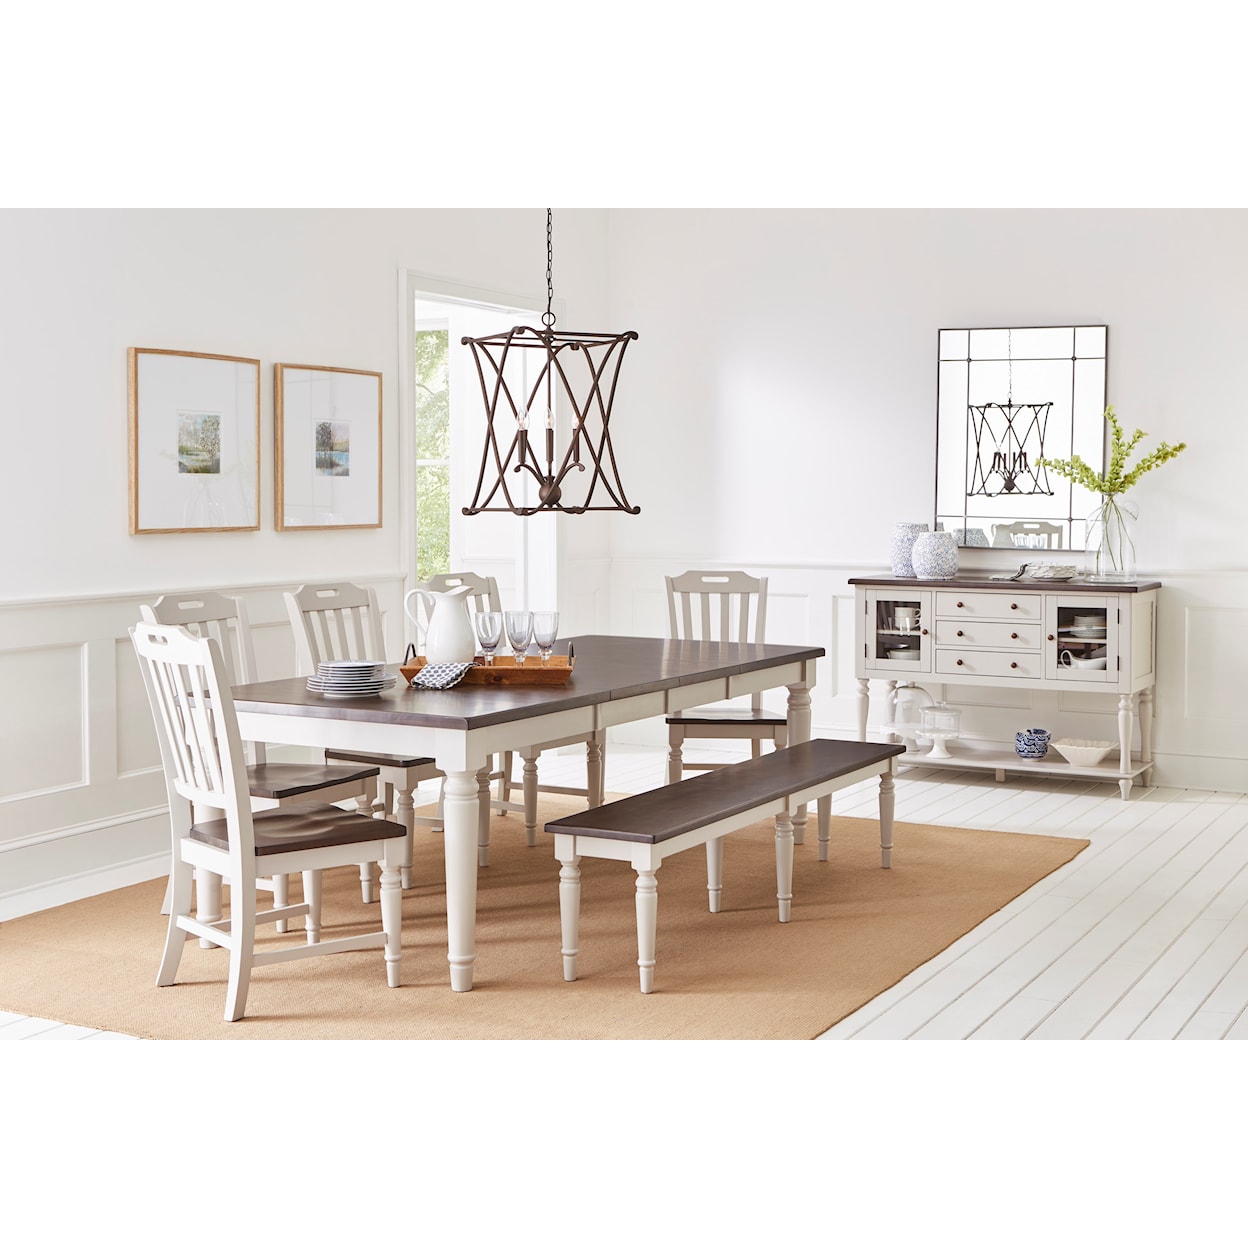 VFM Signature Orchard Park Dining Table with 6 Chairs and Bench